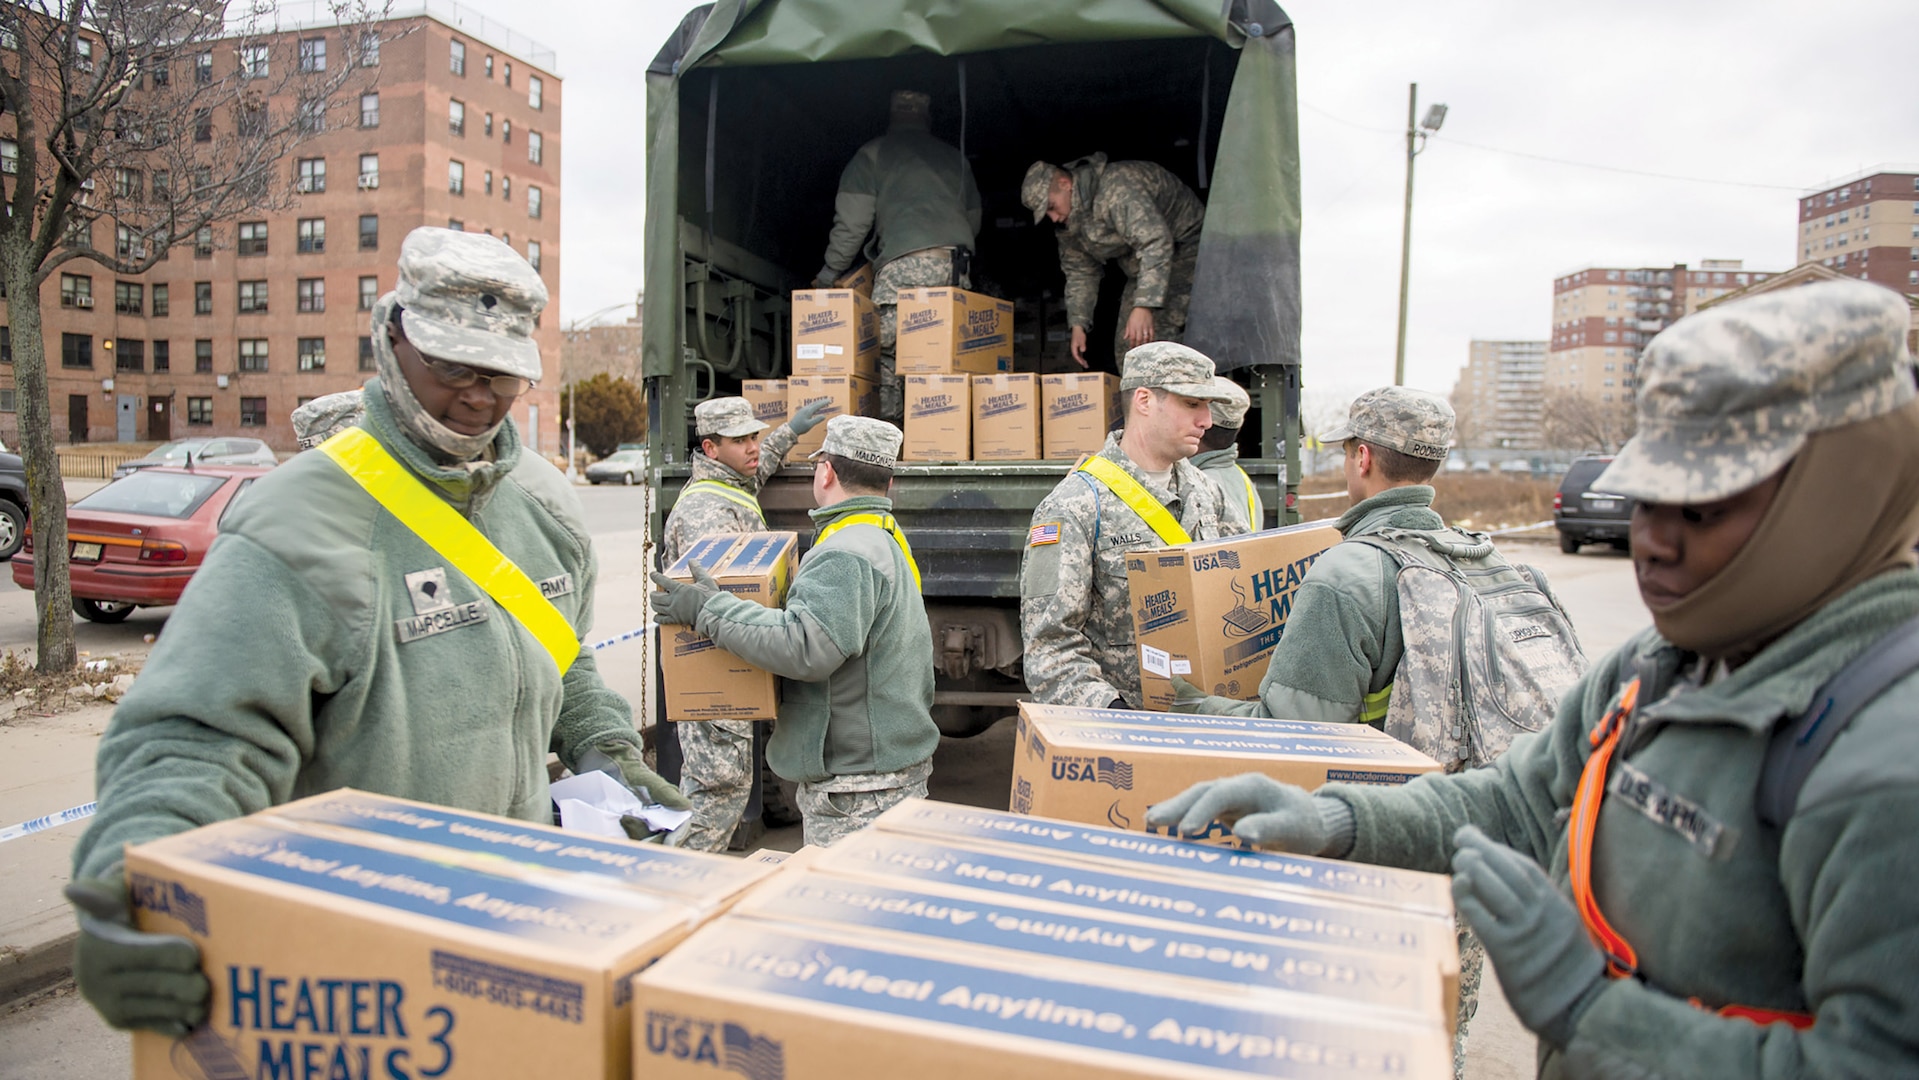 Male troops move boxes from the back of a truck.